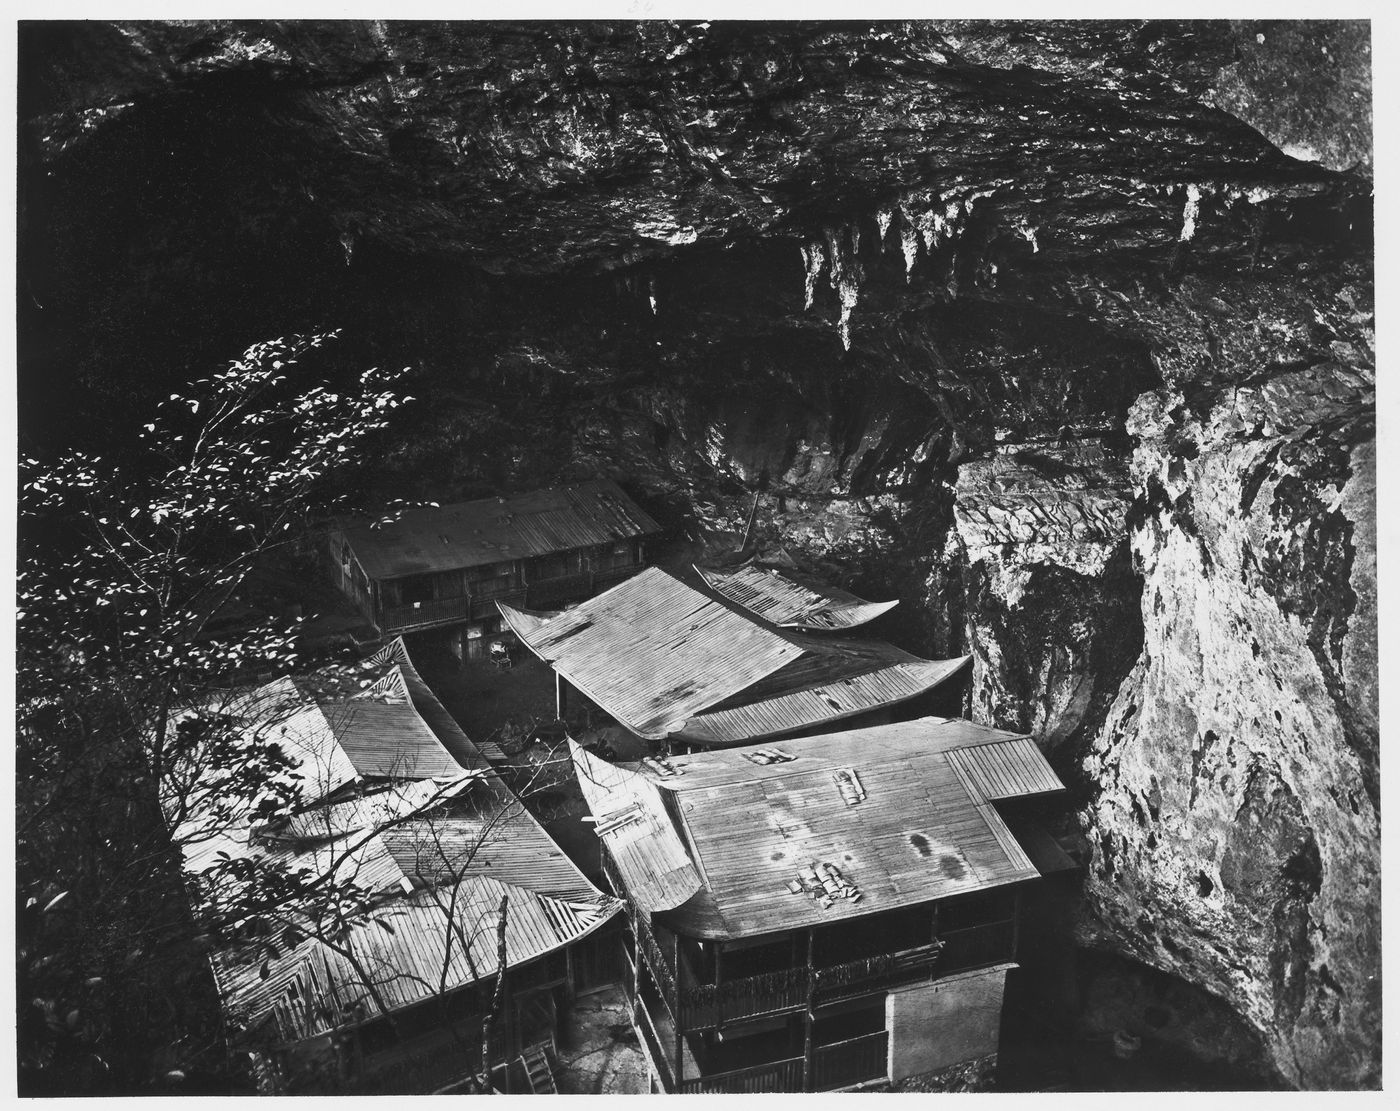 View of the Yuenfu Monastery Cave from above, near Foochow (now Fuzhou), China